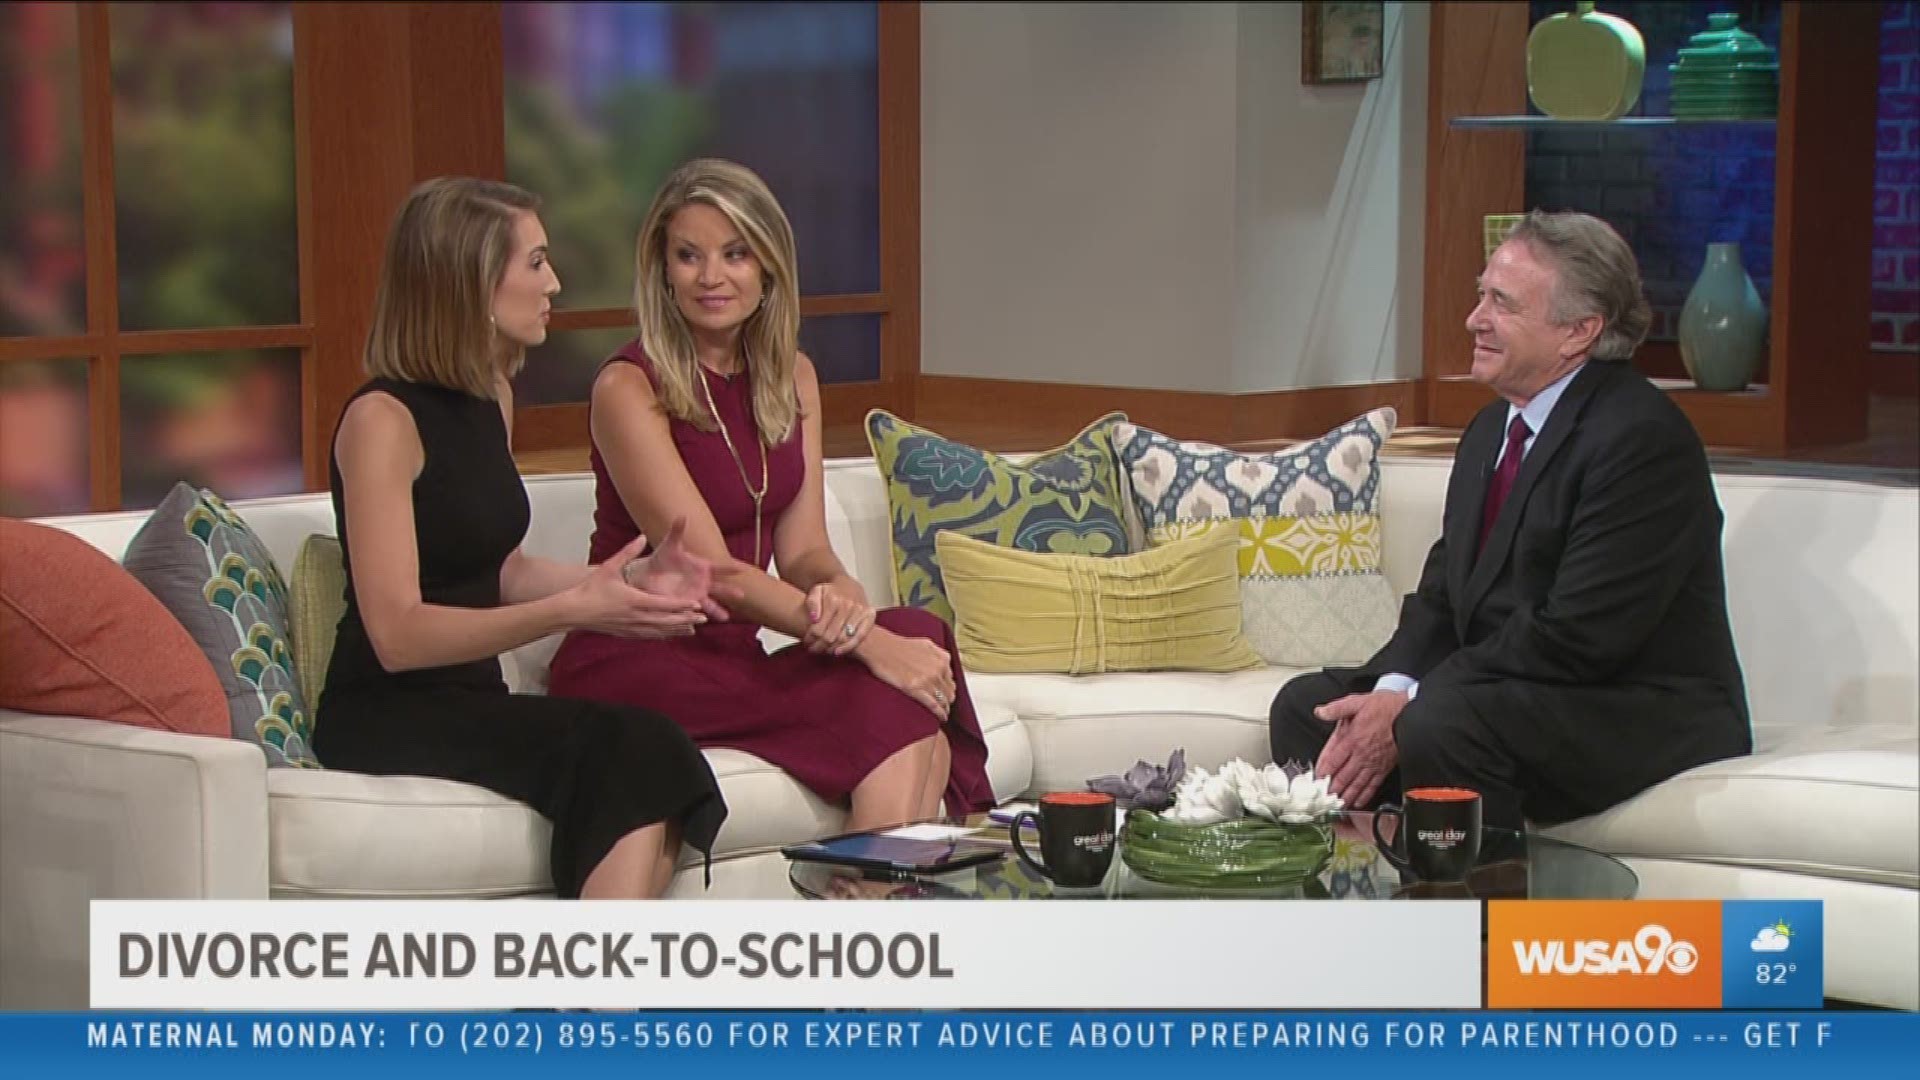 When it comes to back-to-school expenses a lot of times it can be left out of a divorce settlement but it's often an expensive time of year for a divorced family with kids. Alan Plevy, Family Law Attorney at Smolen Plevy, gives the top tips on how to split back-to-school spending for parents.